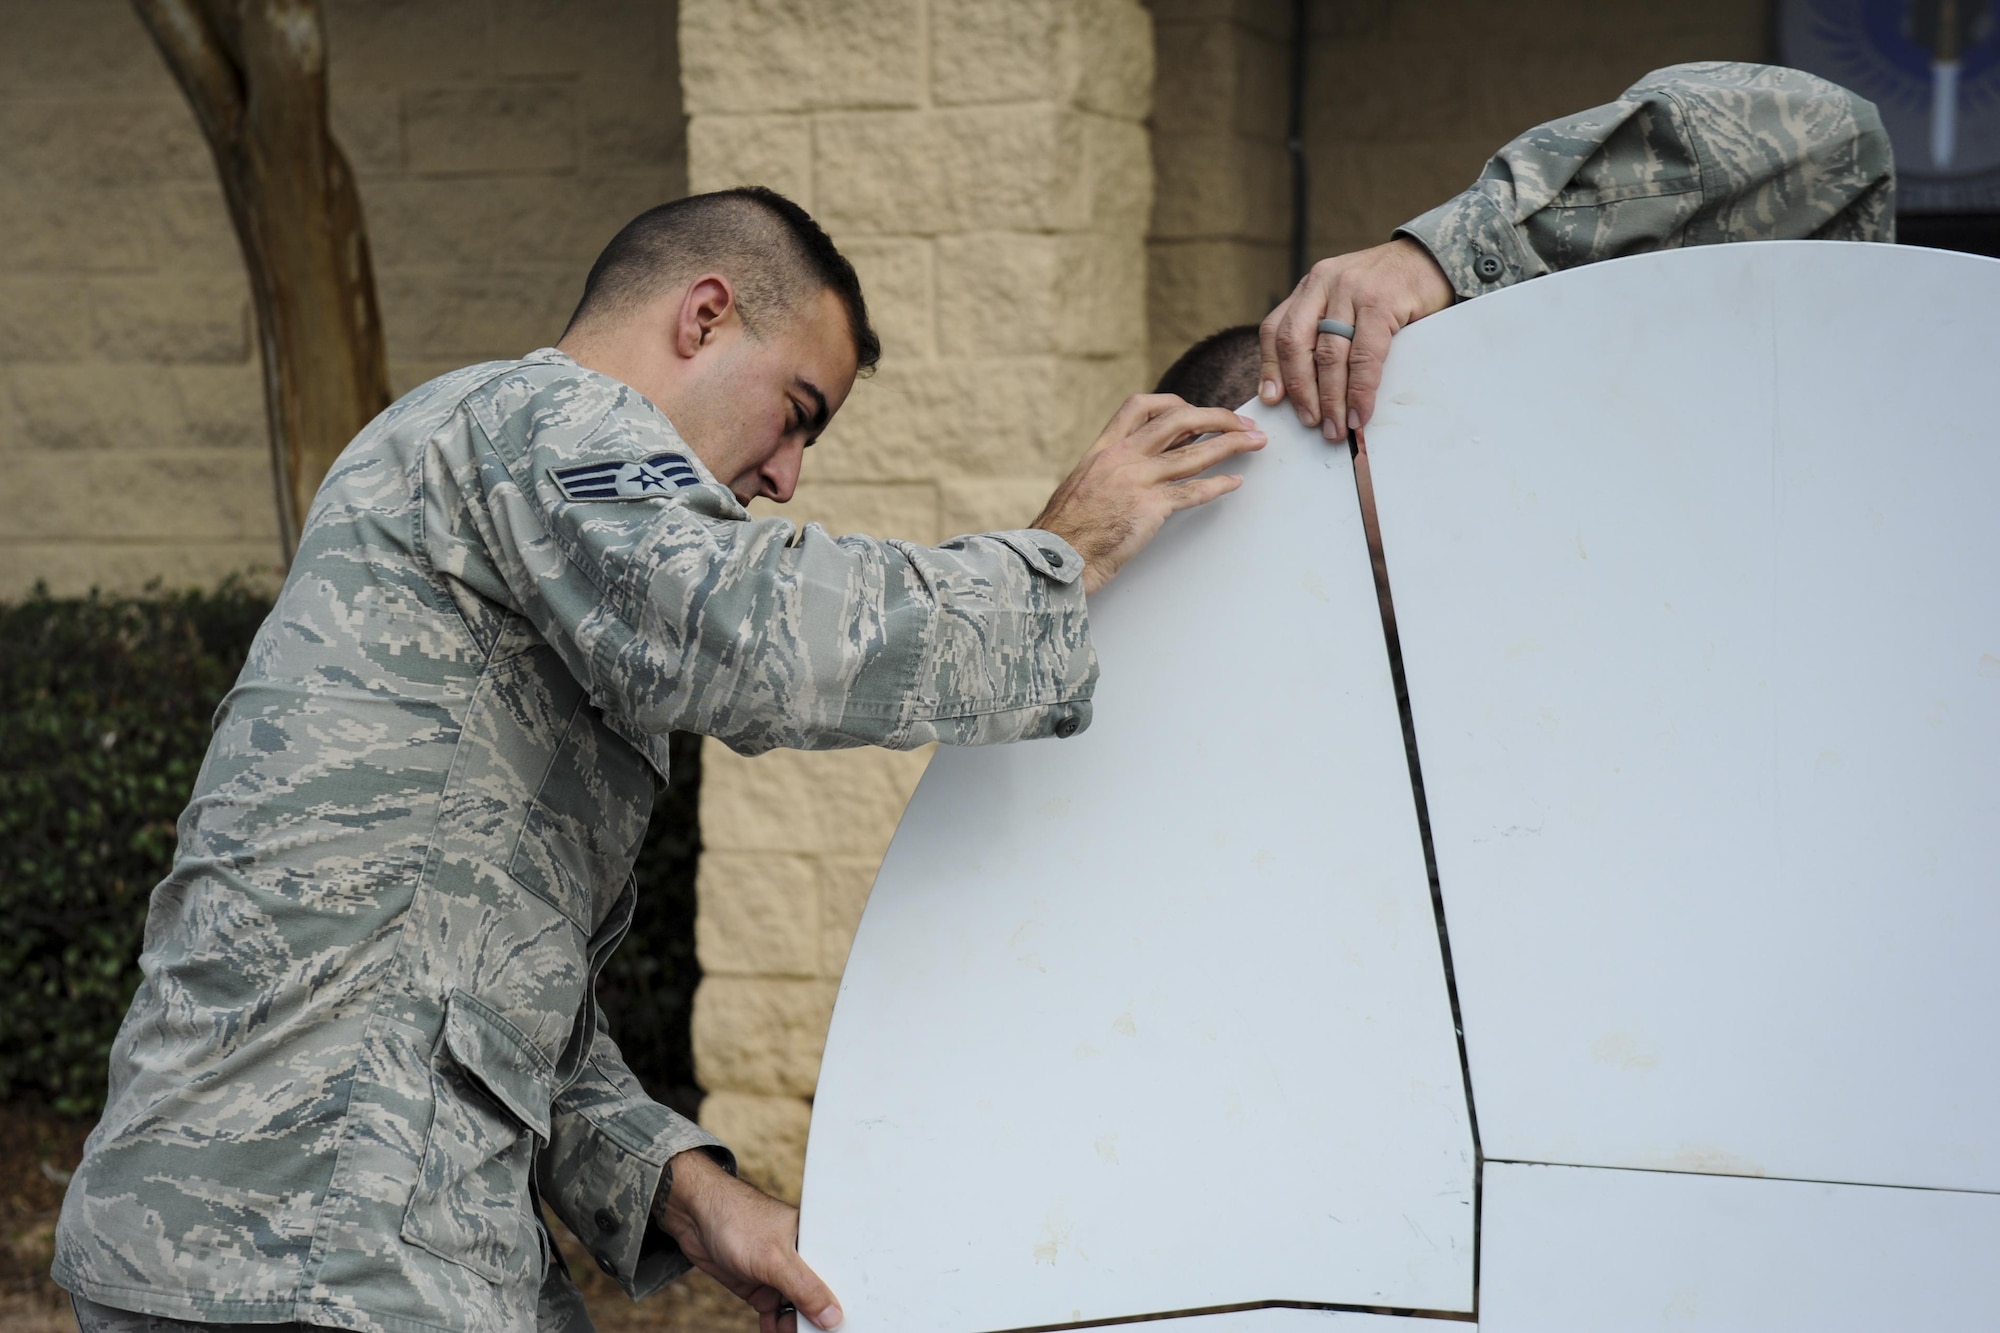 Senior Airman Daniel Robertson, a client systems journeyman with the 25th Intelligence Squadron, assists in installing a Hawkeye lite satellite dish at Hurlburt Field, Fla., Jan. 11, 2017. These dishes are used to provide secured internet access in deployed locations to continue special operations missions. Anytime, anyplace. (U.S. Air Force photo by Airman Dennis Spain)